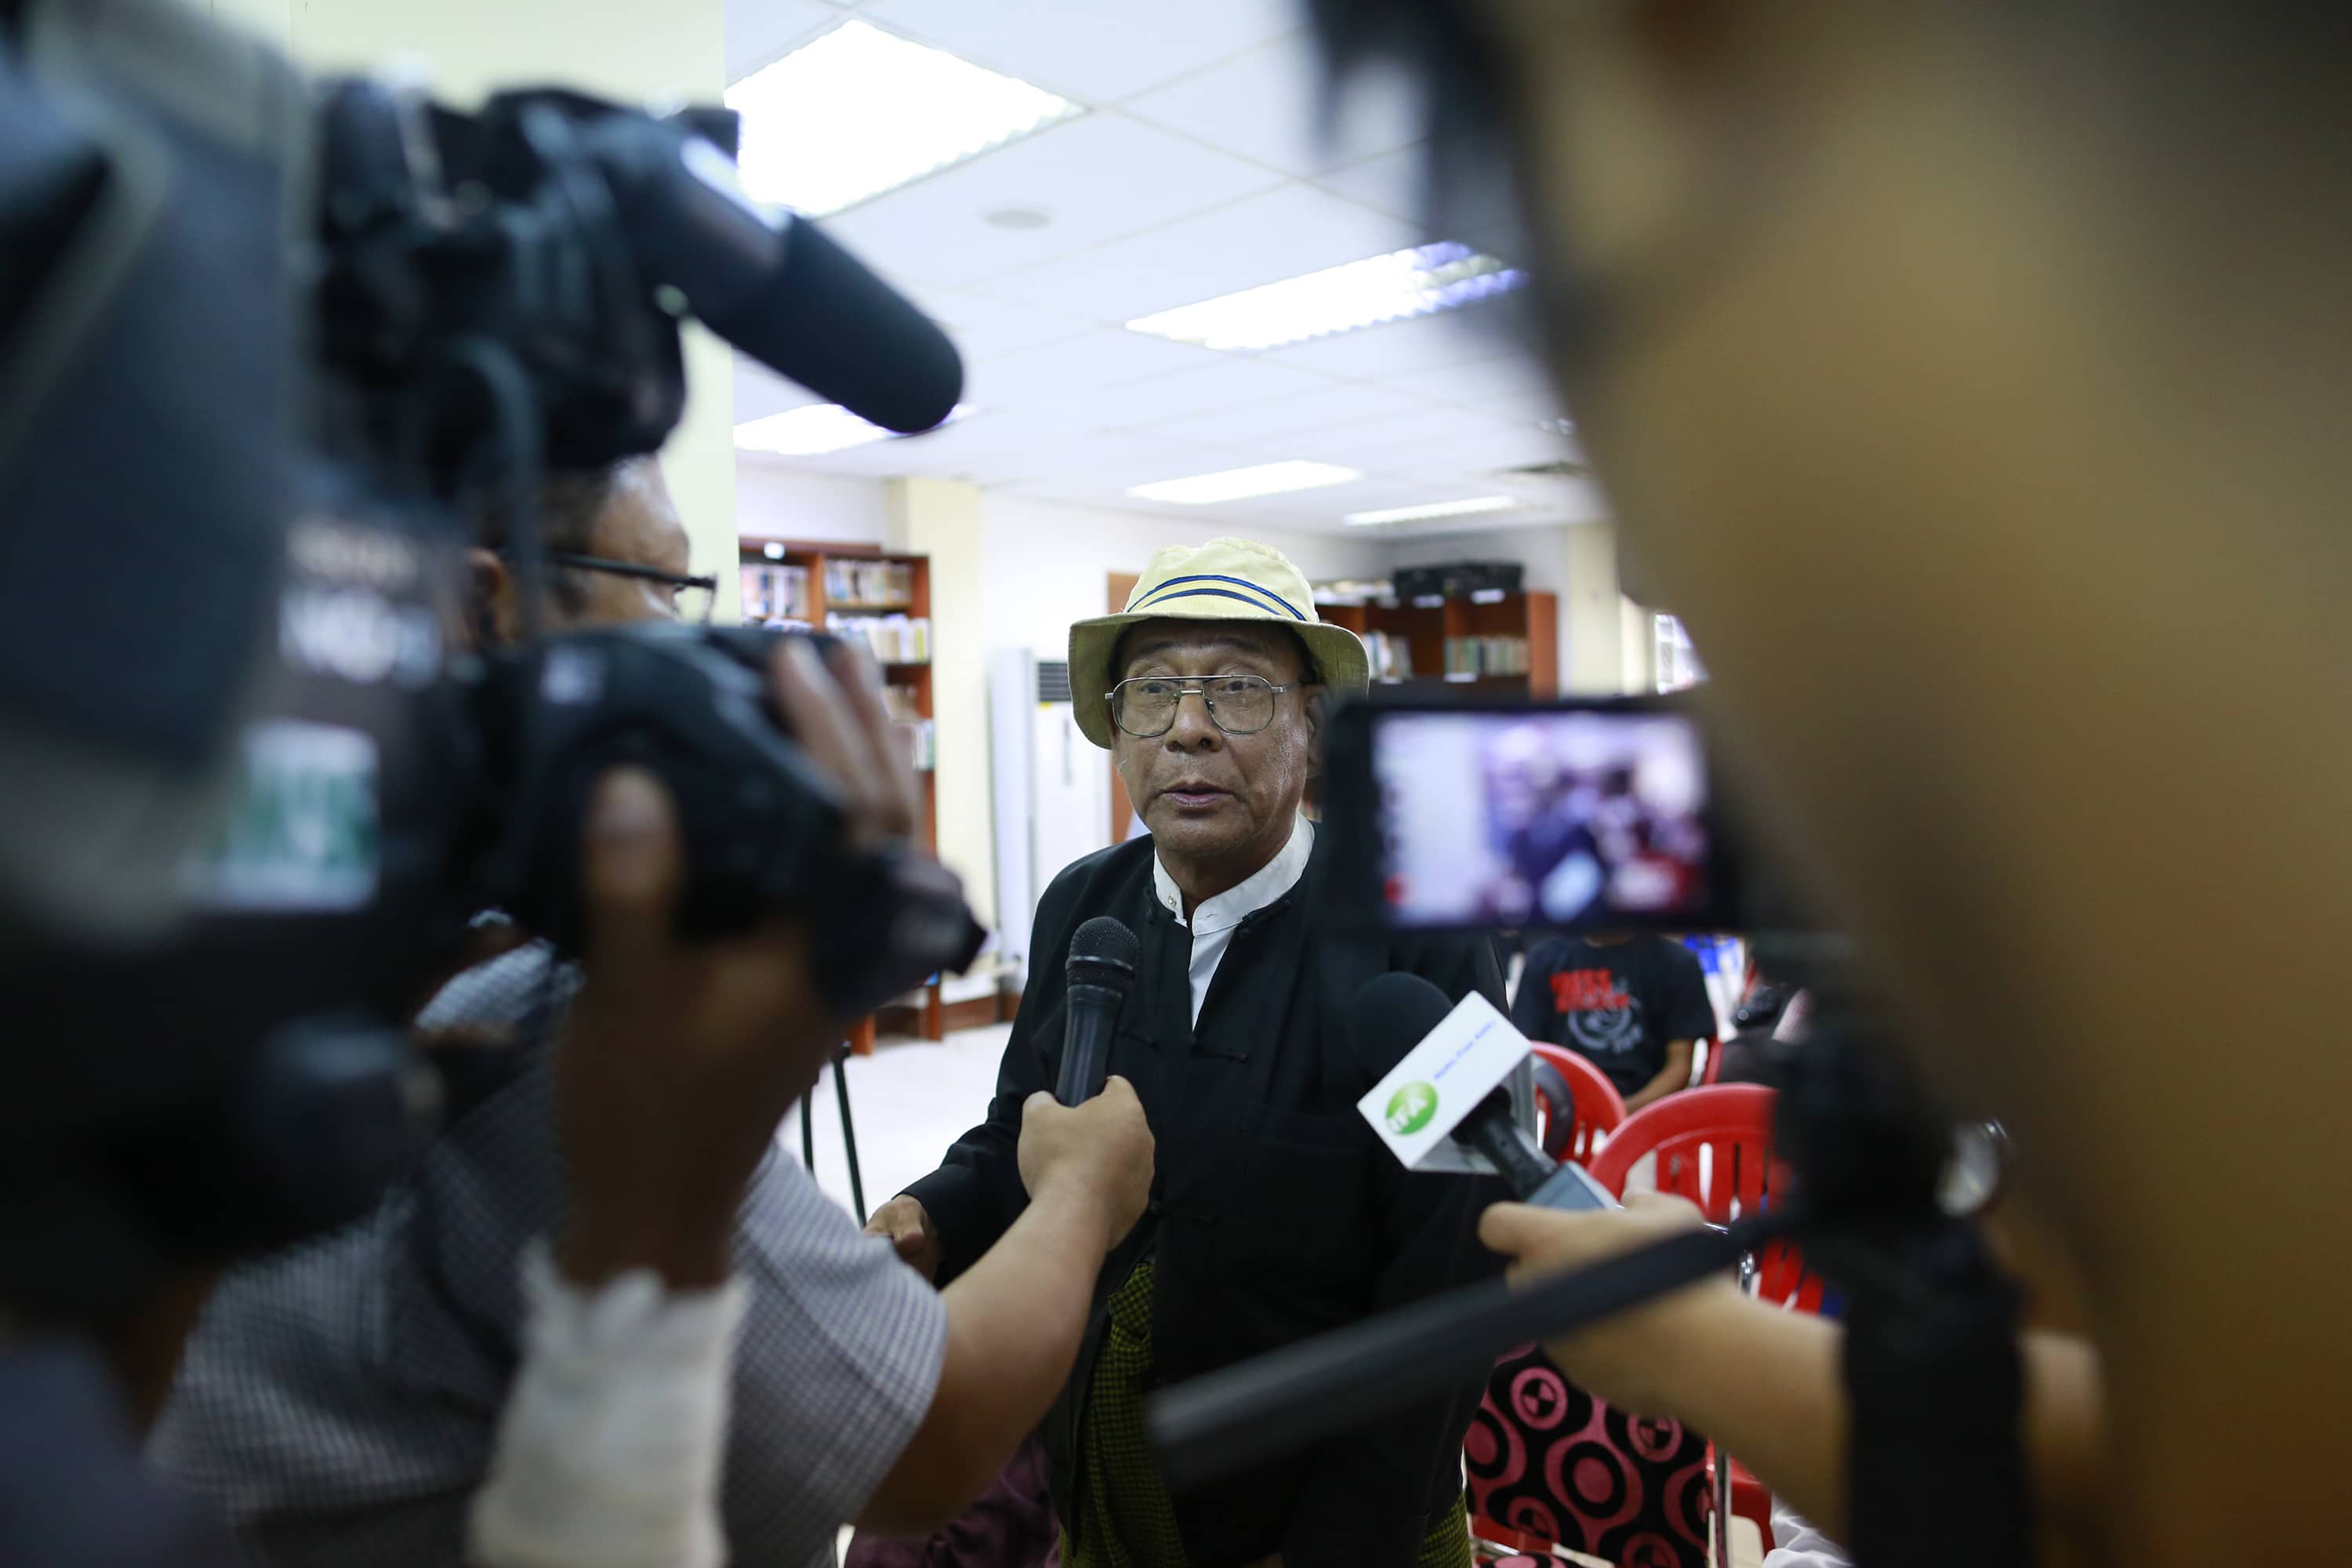 A lawyer working for "Unity Journal" talks to the media during a conference about press freedom in Yangon, 26 April 2014, REUTERS/Soe Zeya Tun